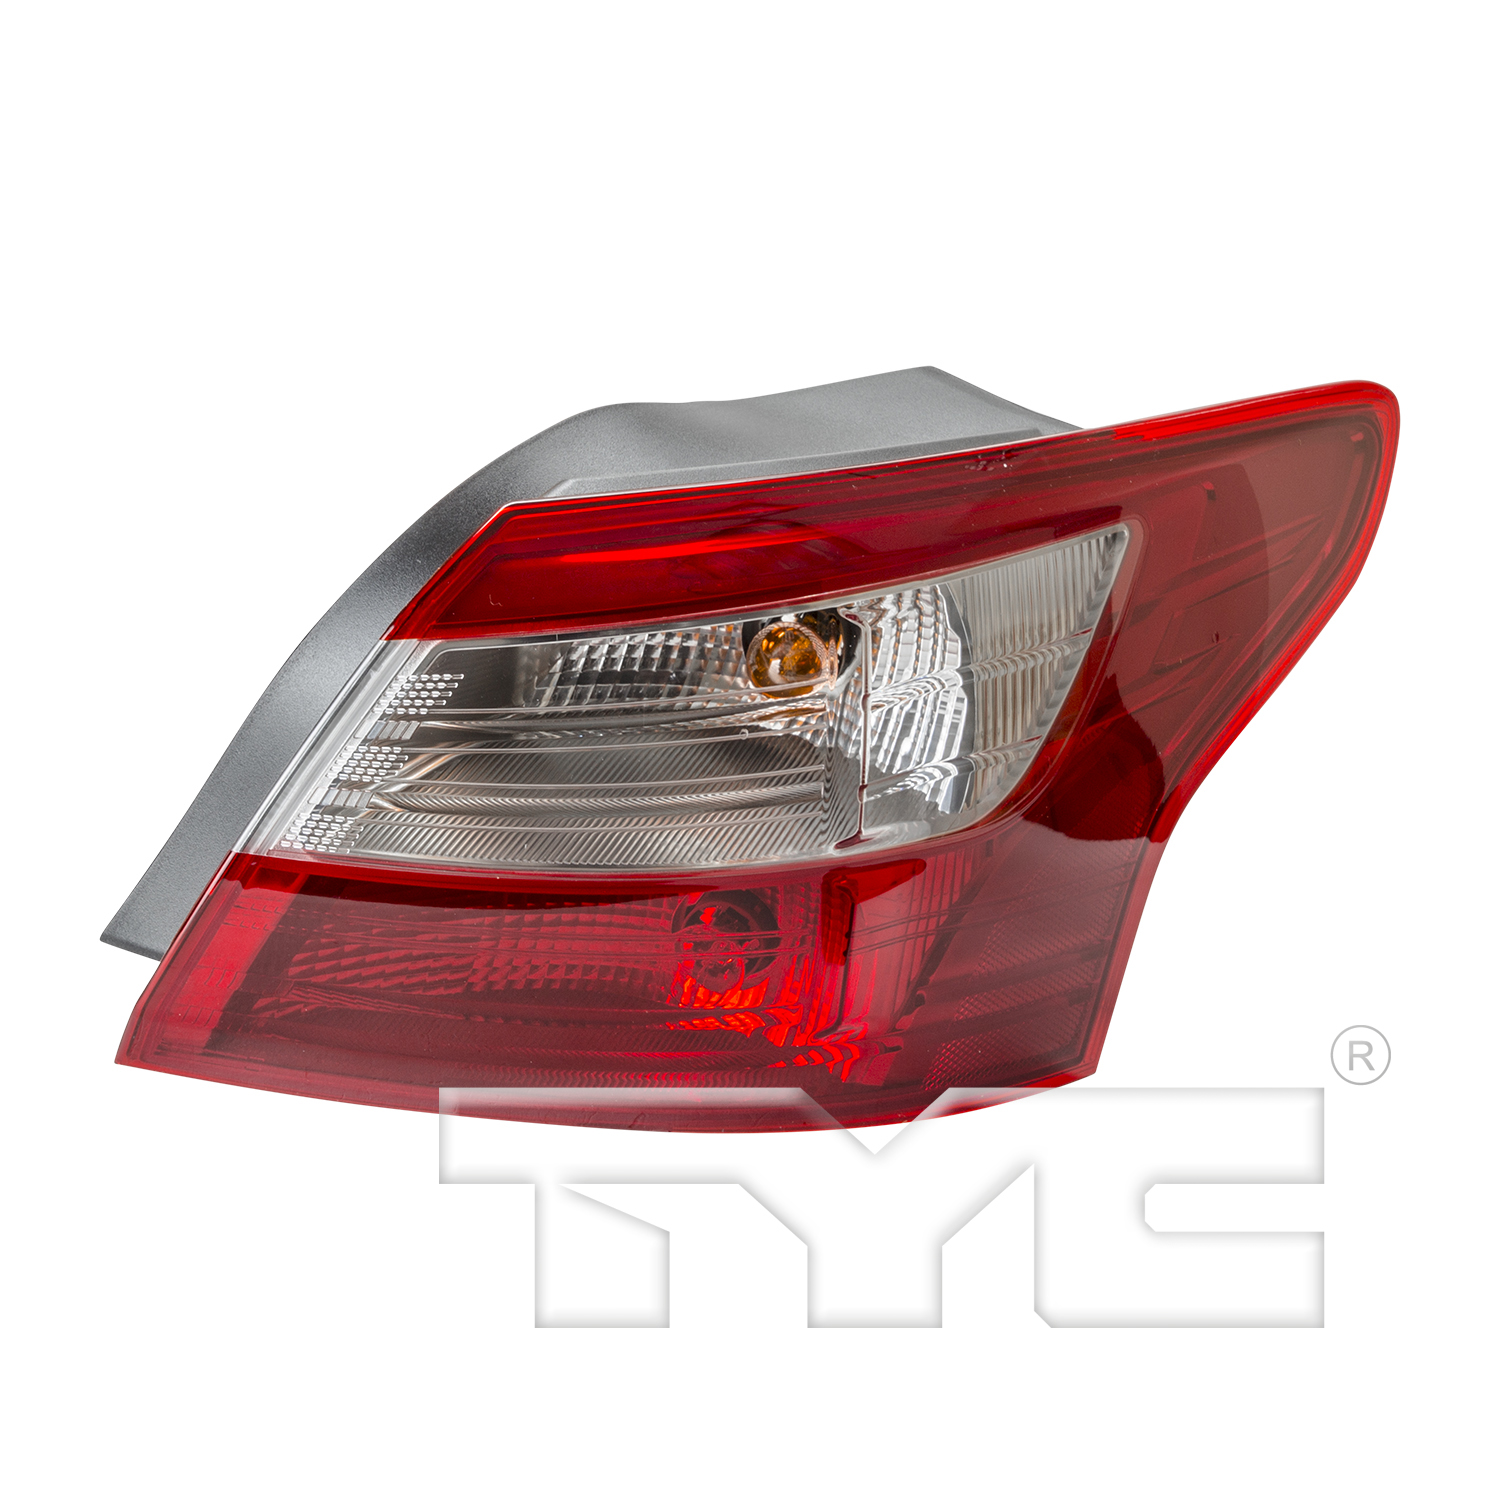 Aftermarket TAILLIGHTS for FORD - FOCUS, FOCUS,12-14,RT Taillamp lens/housing